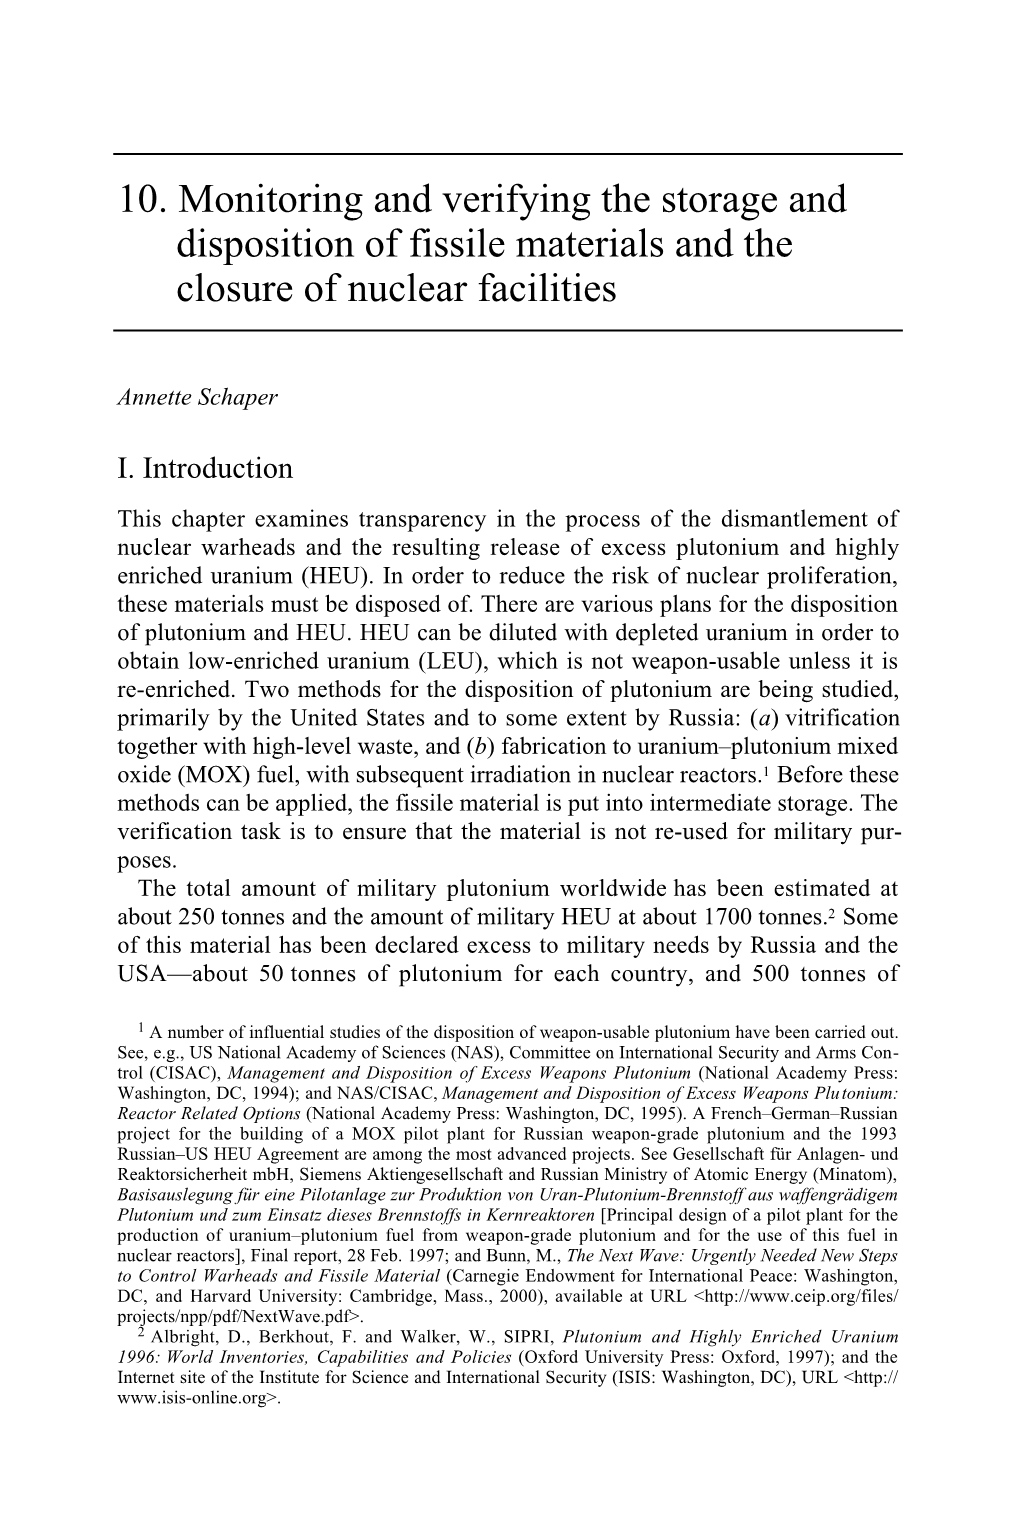 Transparency in Nuclear Warheads and Materials: The